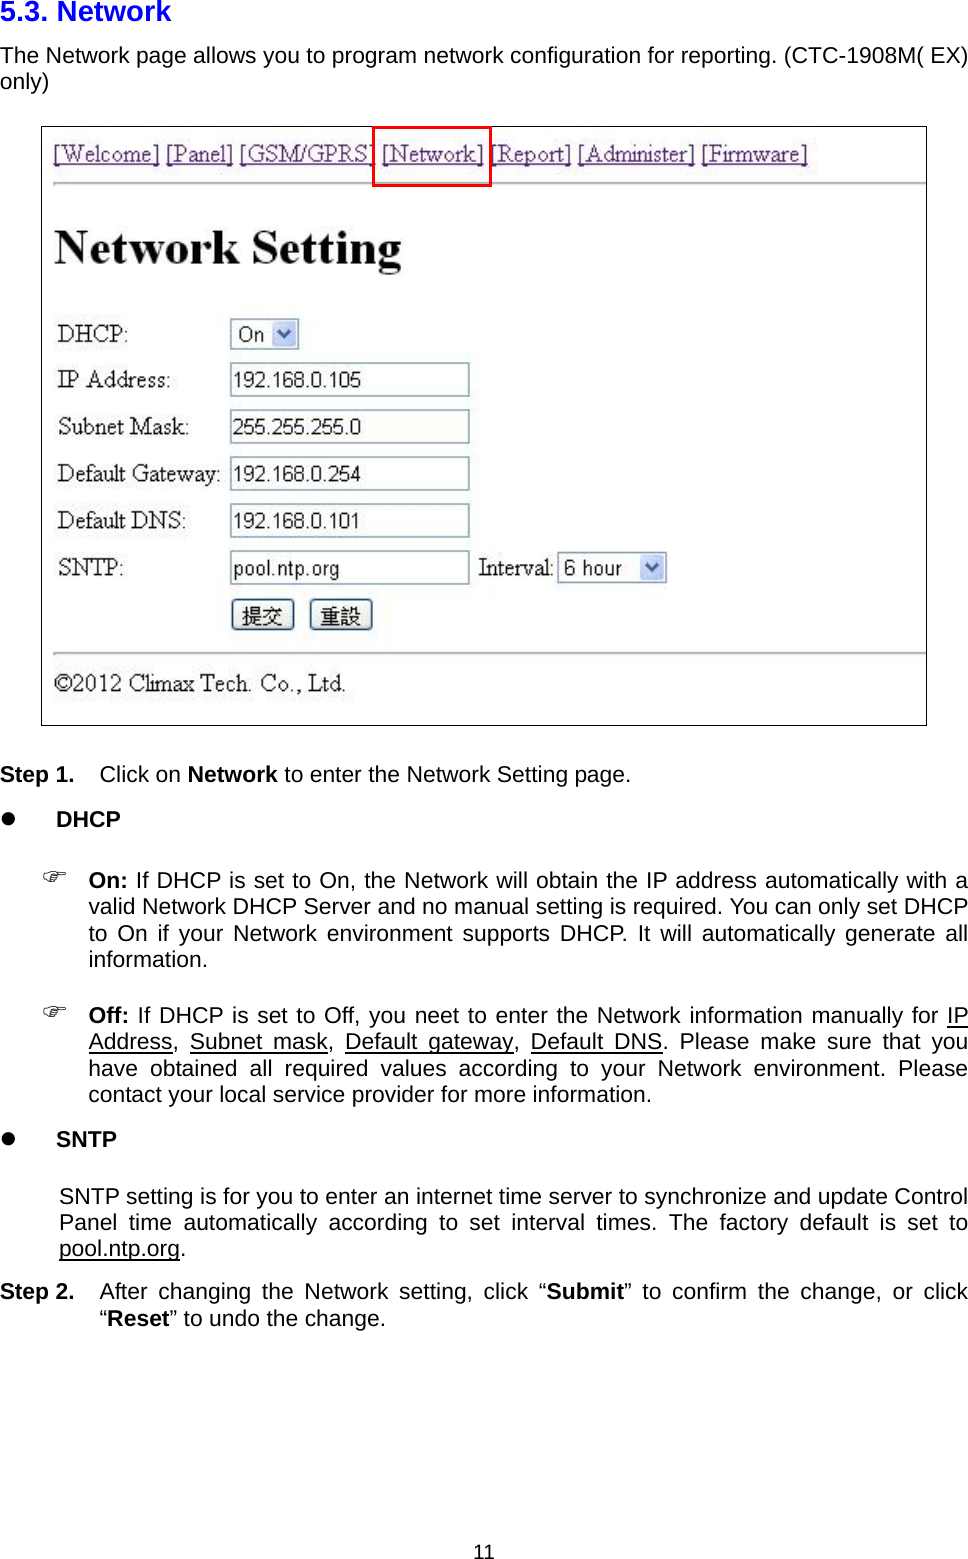  115.3. Network   The Network page allows you to program network configuration for reporting. (CTC-1908M( EX) only)  Step 1. Click on Network to enter the Network Setting page.  DHCP  On: If DHCP is set to On, the Network will obtain the IP address automatically with a valid Network DHCP Server and no manual setting is required. You can only set DHCP to On if your Network environment supports DHCP. It will automatically generate all information.  Off: If DHCP is set to Off, you neet to enter the Network information manually for IP Address, Subnet mask, Default gateway, Default DNS. Please make sure that you have obtained all required values according to your Network environment. Please contact your local service provider for more information.  SNTP SNTP setting is for you to enter an internet time server to synchronize and update Control Panel time automatically according to set interval times. The factory default is set to pool.ntp.org. Step 2.  After changing the Network setting, click “Submit” to confirm the change, or click “Reset” to undo the change.     